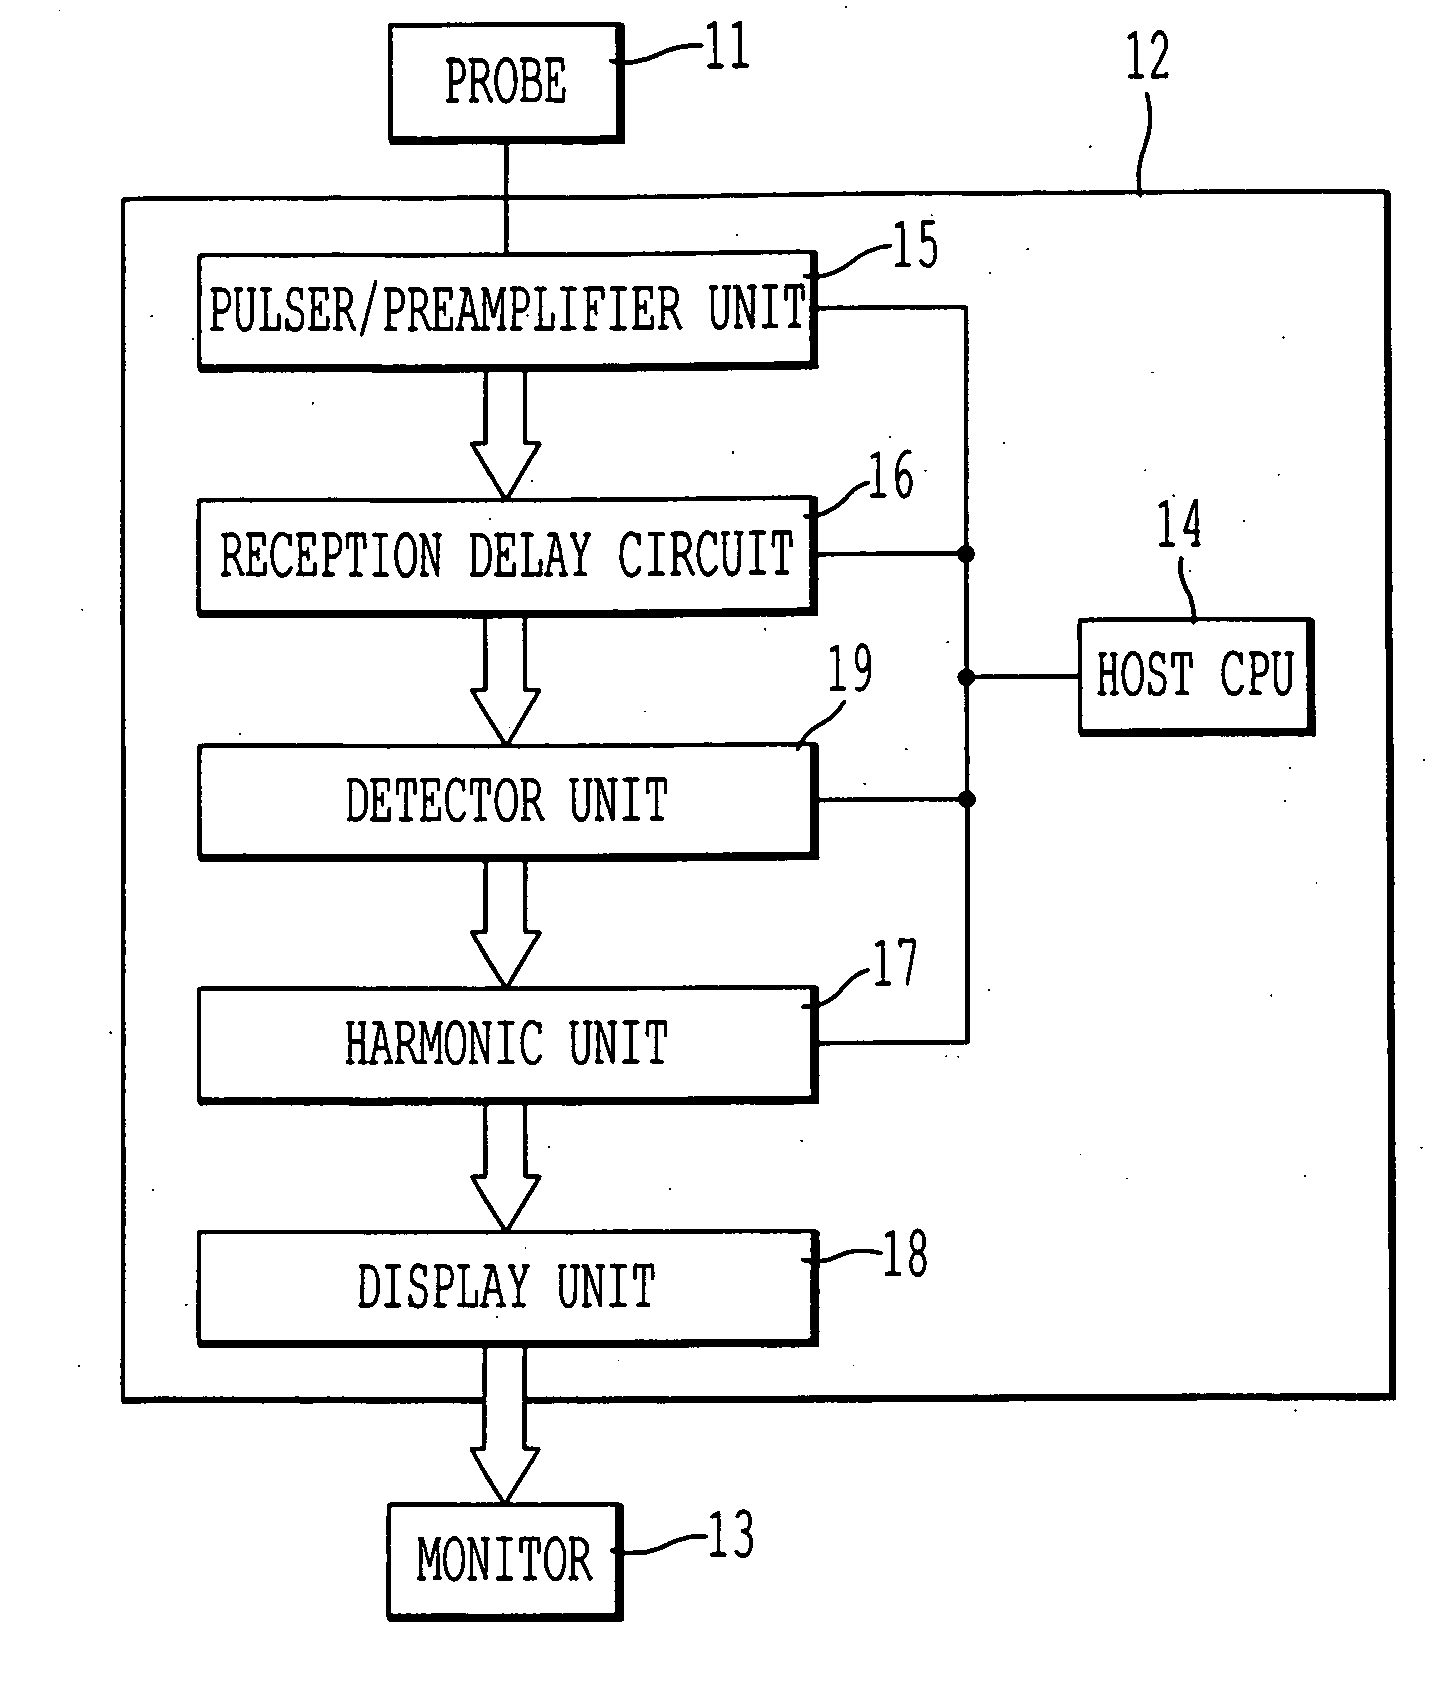 Apparatus and method for ultrasonic diagnostic imaging